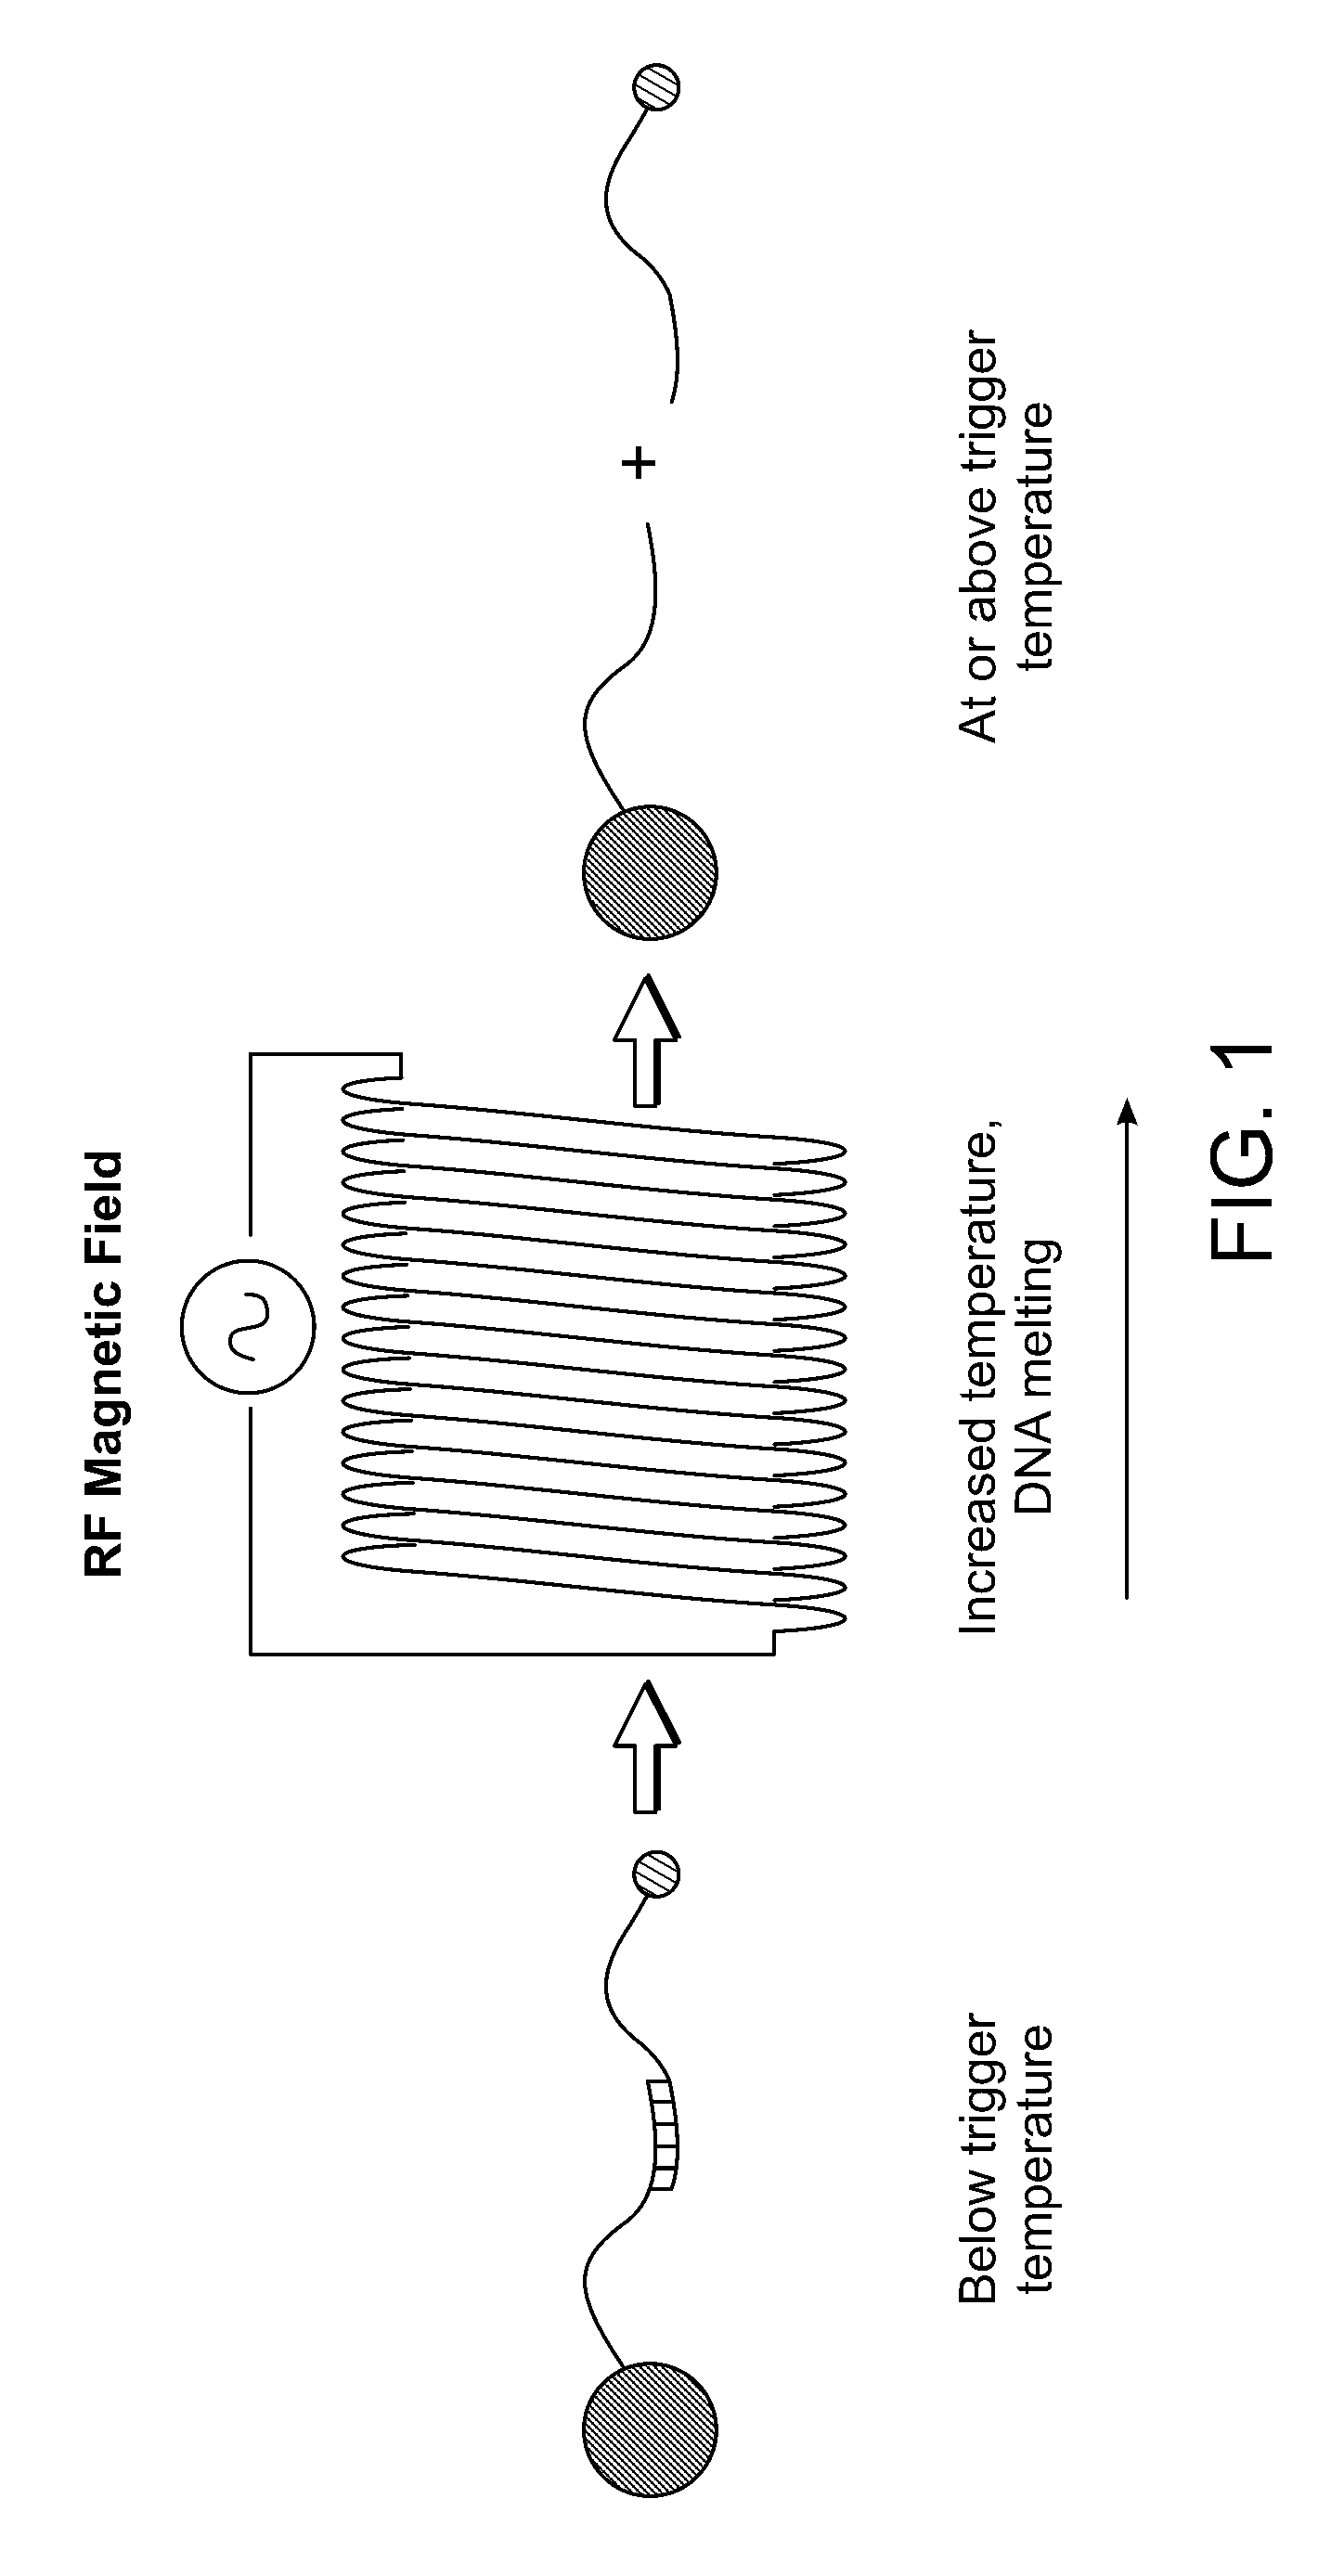 Remotely triggered release from heatable surfaces